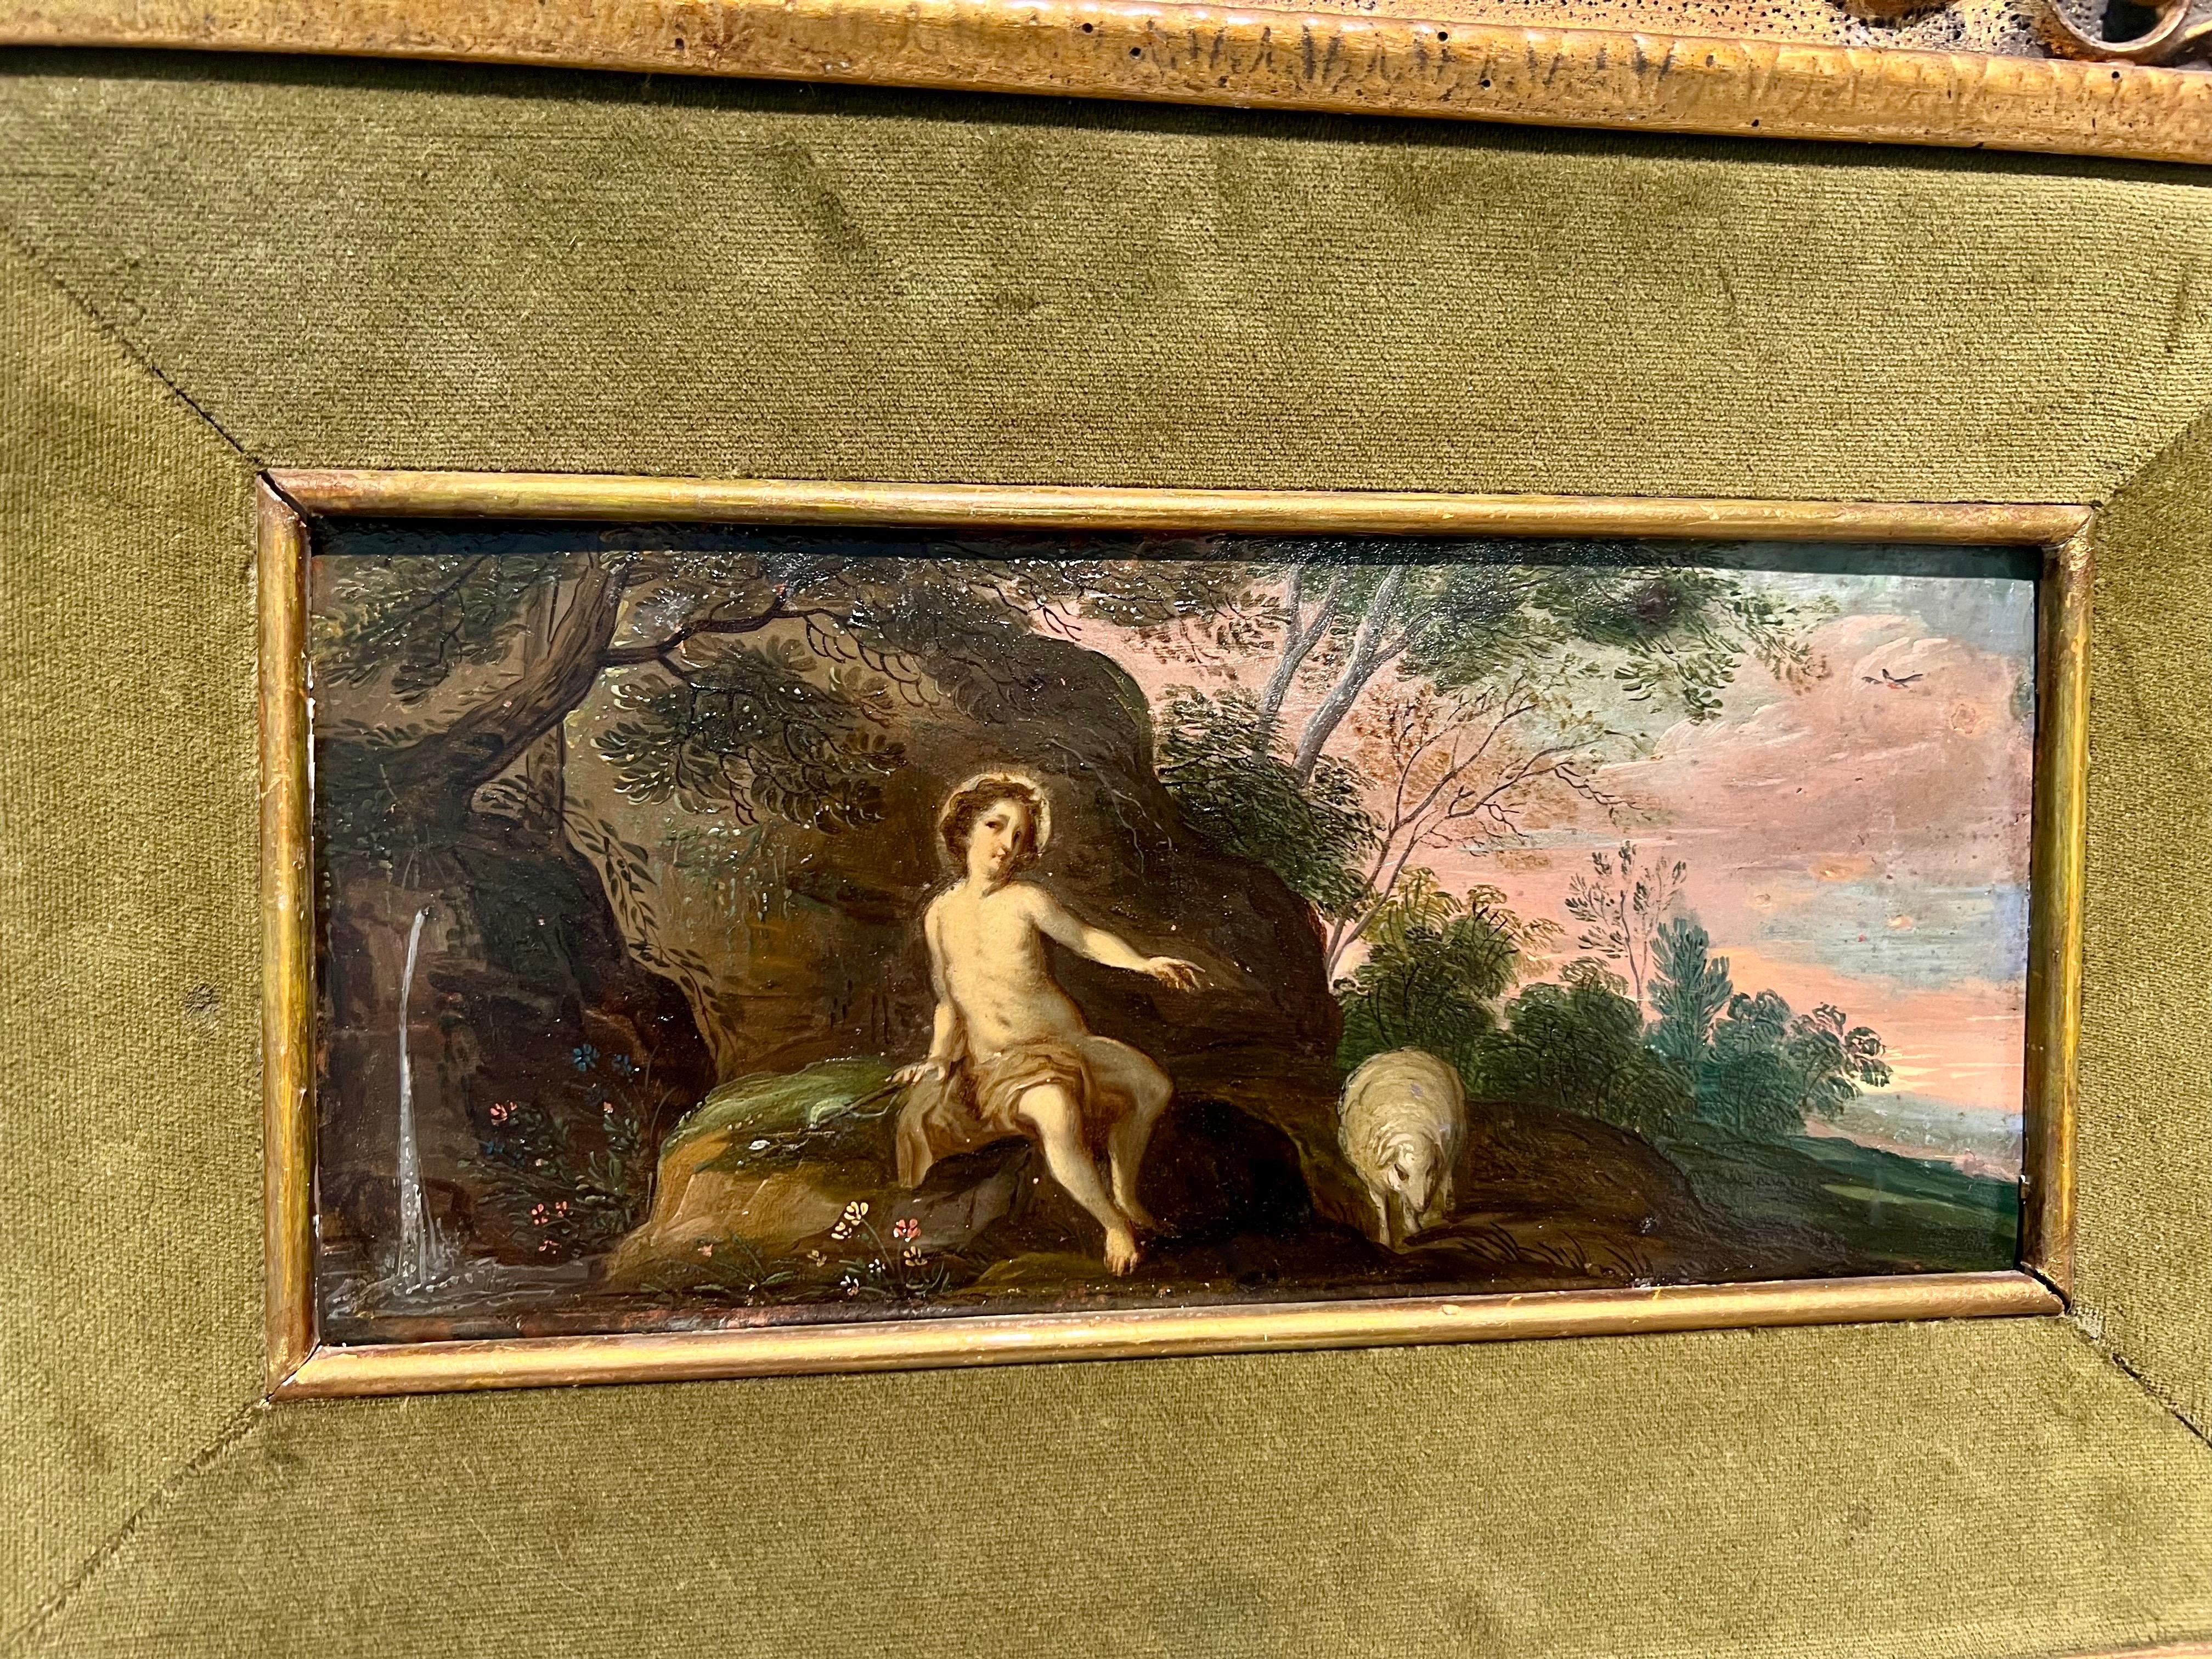 17th century religious old master oil - St. John the Baptist in a landscape - Old Masters Painting by Jan Van Balen